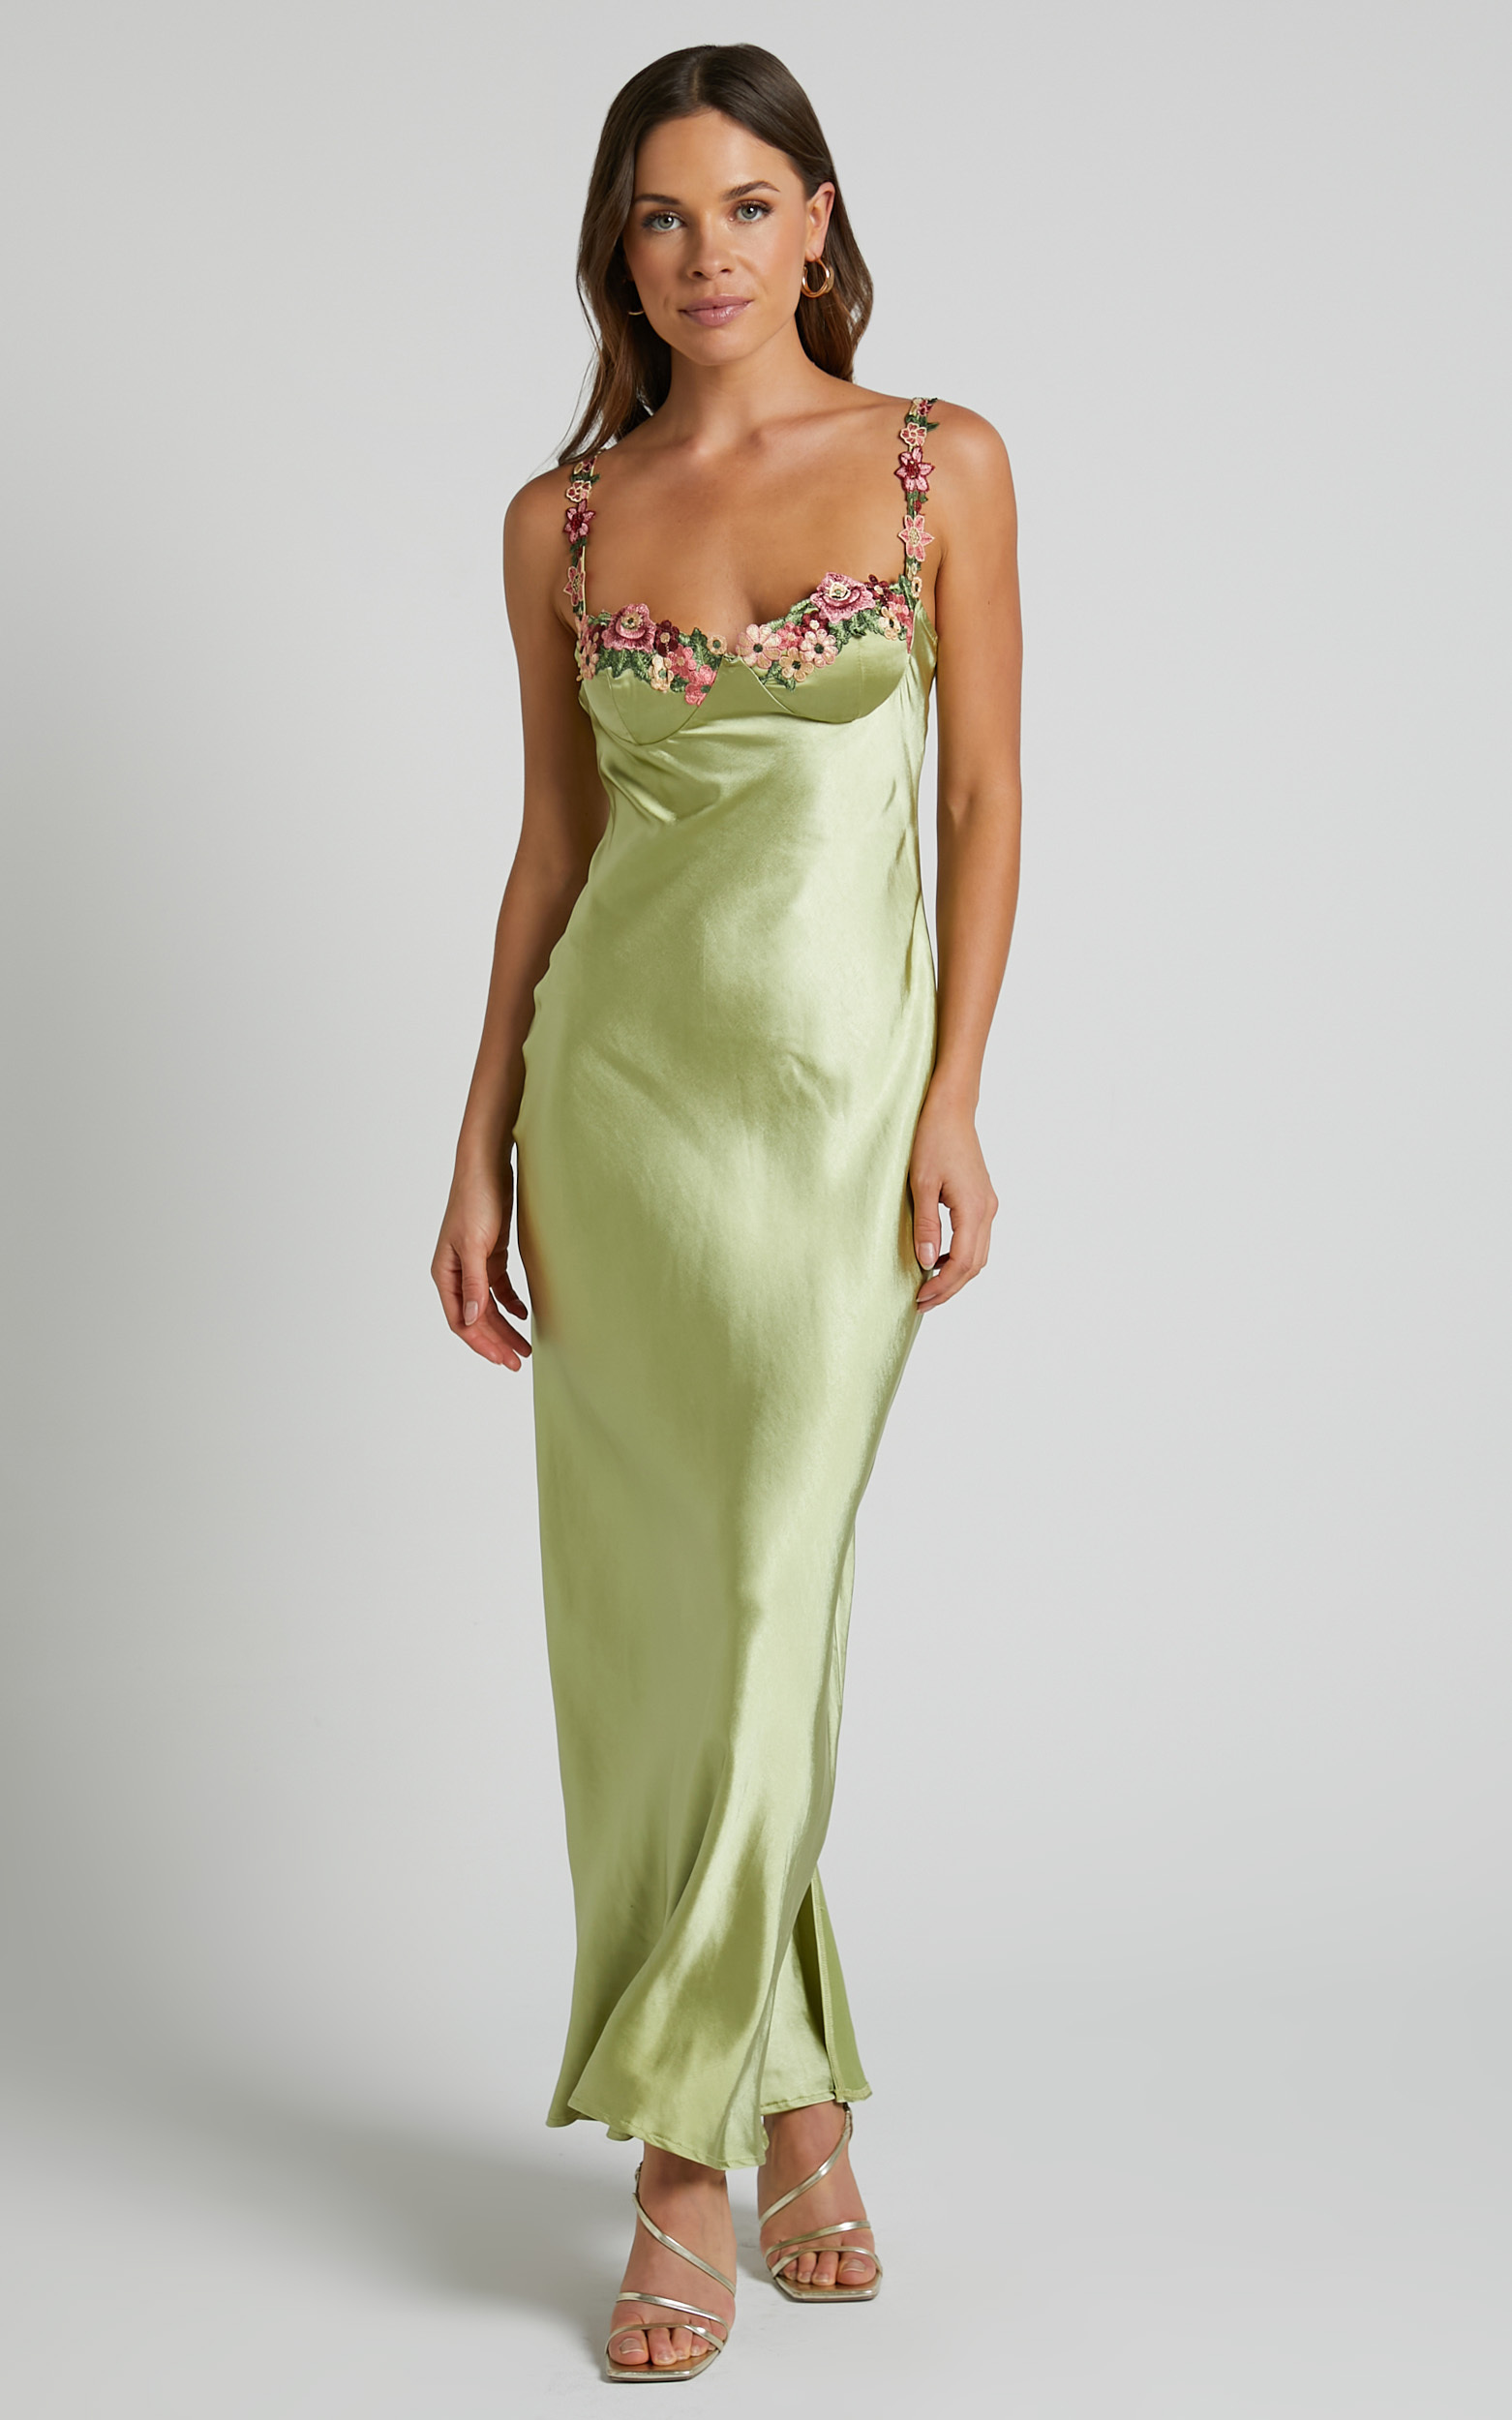 Harmony Floral Detail Cup Bust Satin Maxi Dress in Citrus - 06, YEL2, hi-res image number null